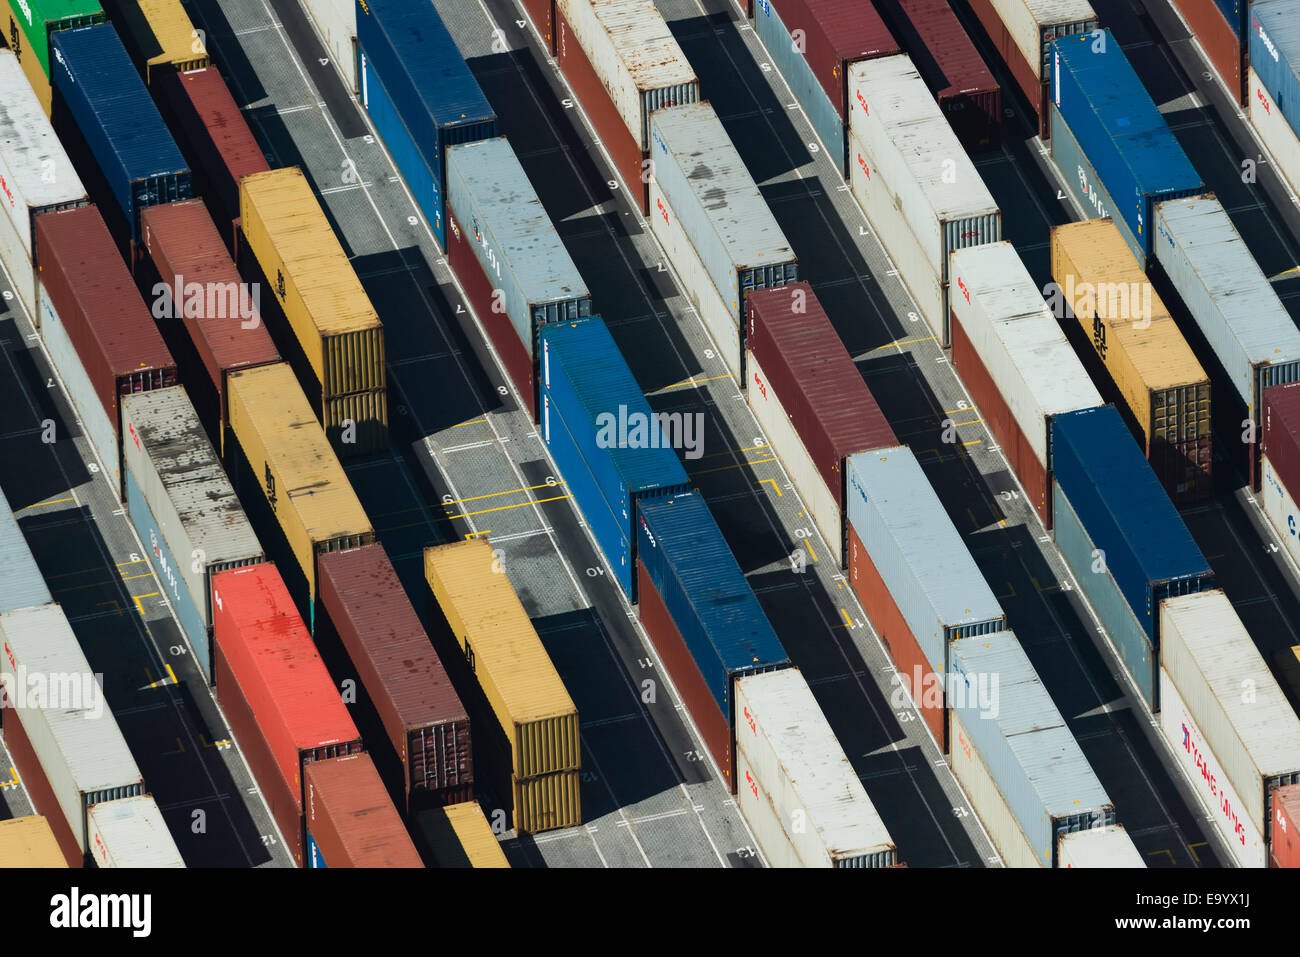 Aerial view of stacked cargo containers, Port Melbourne, Melbourne, Victoria, Australia Stock Photo